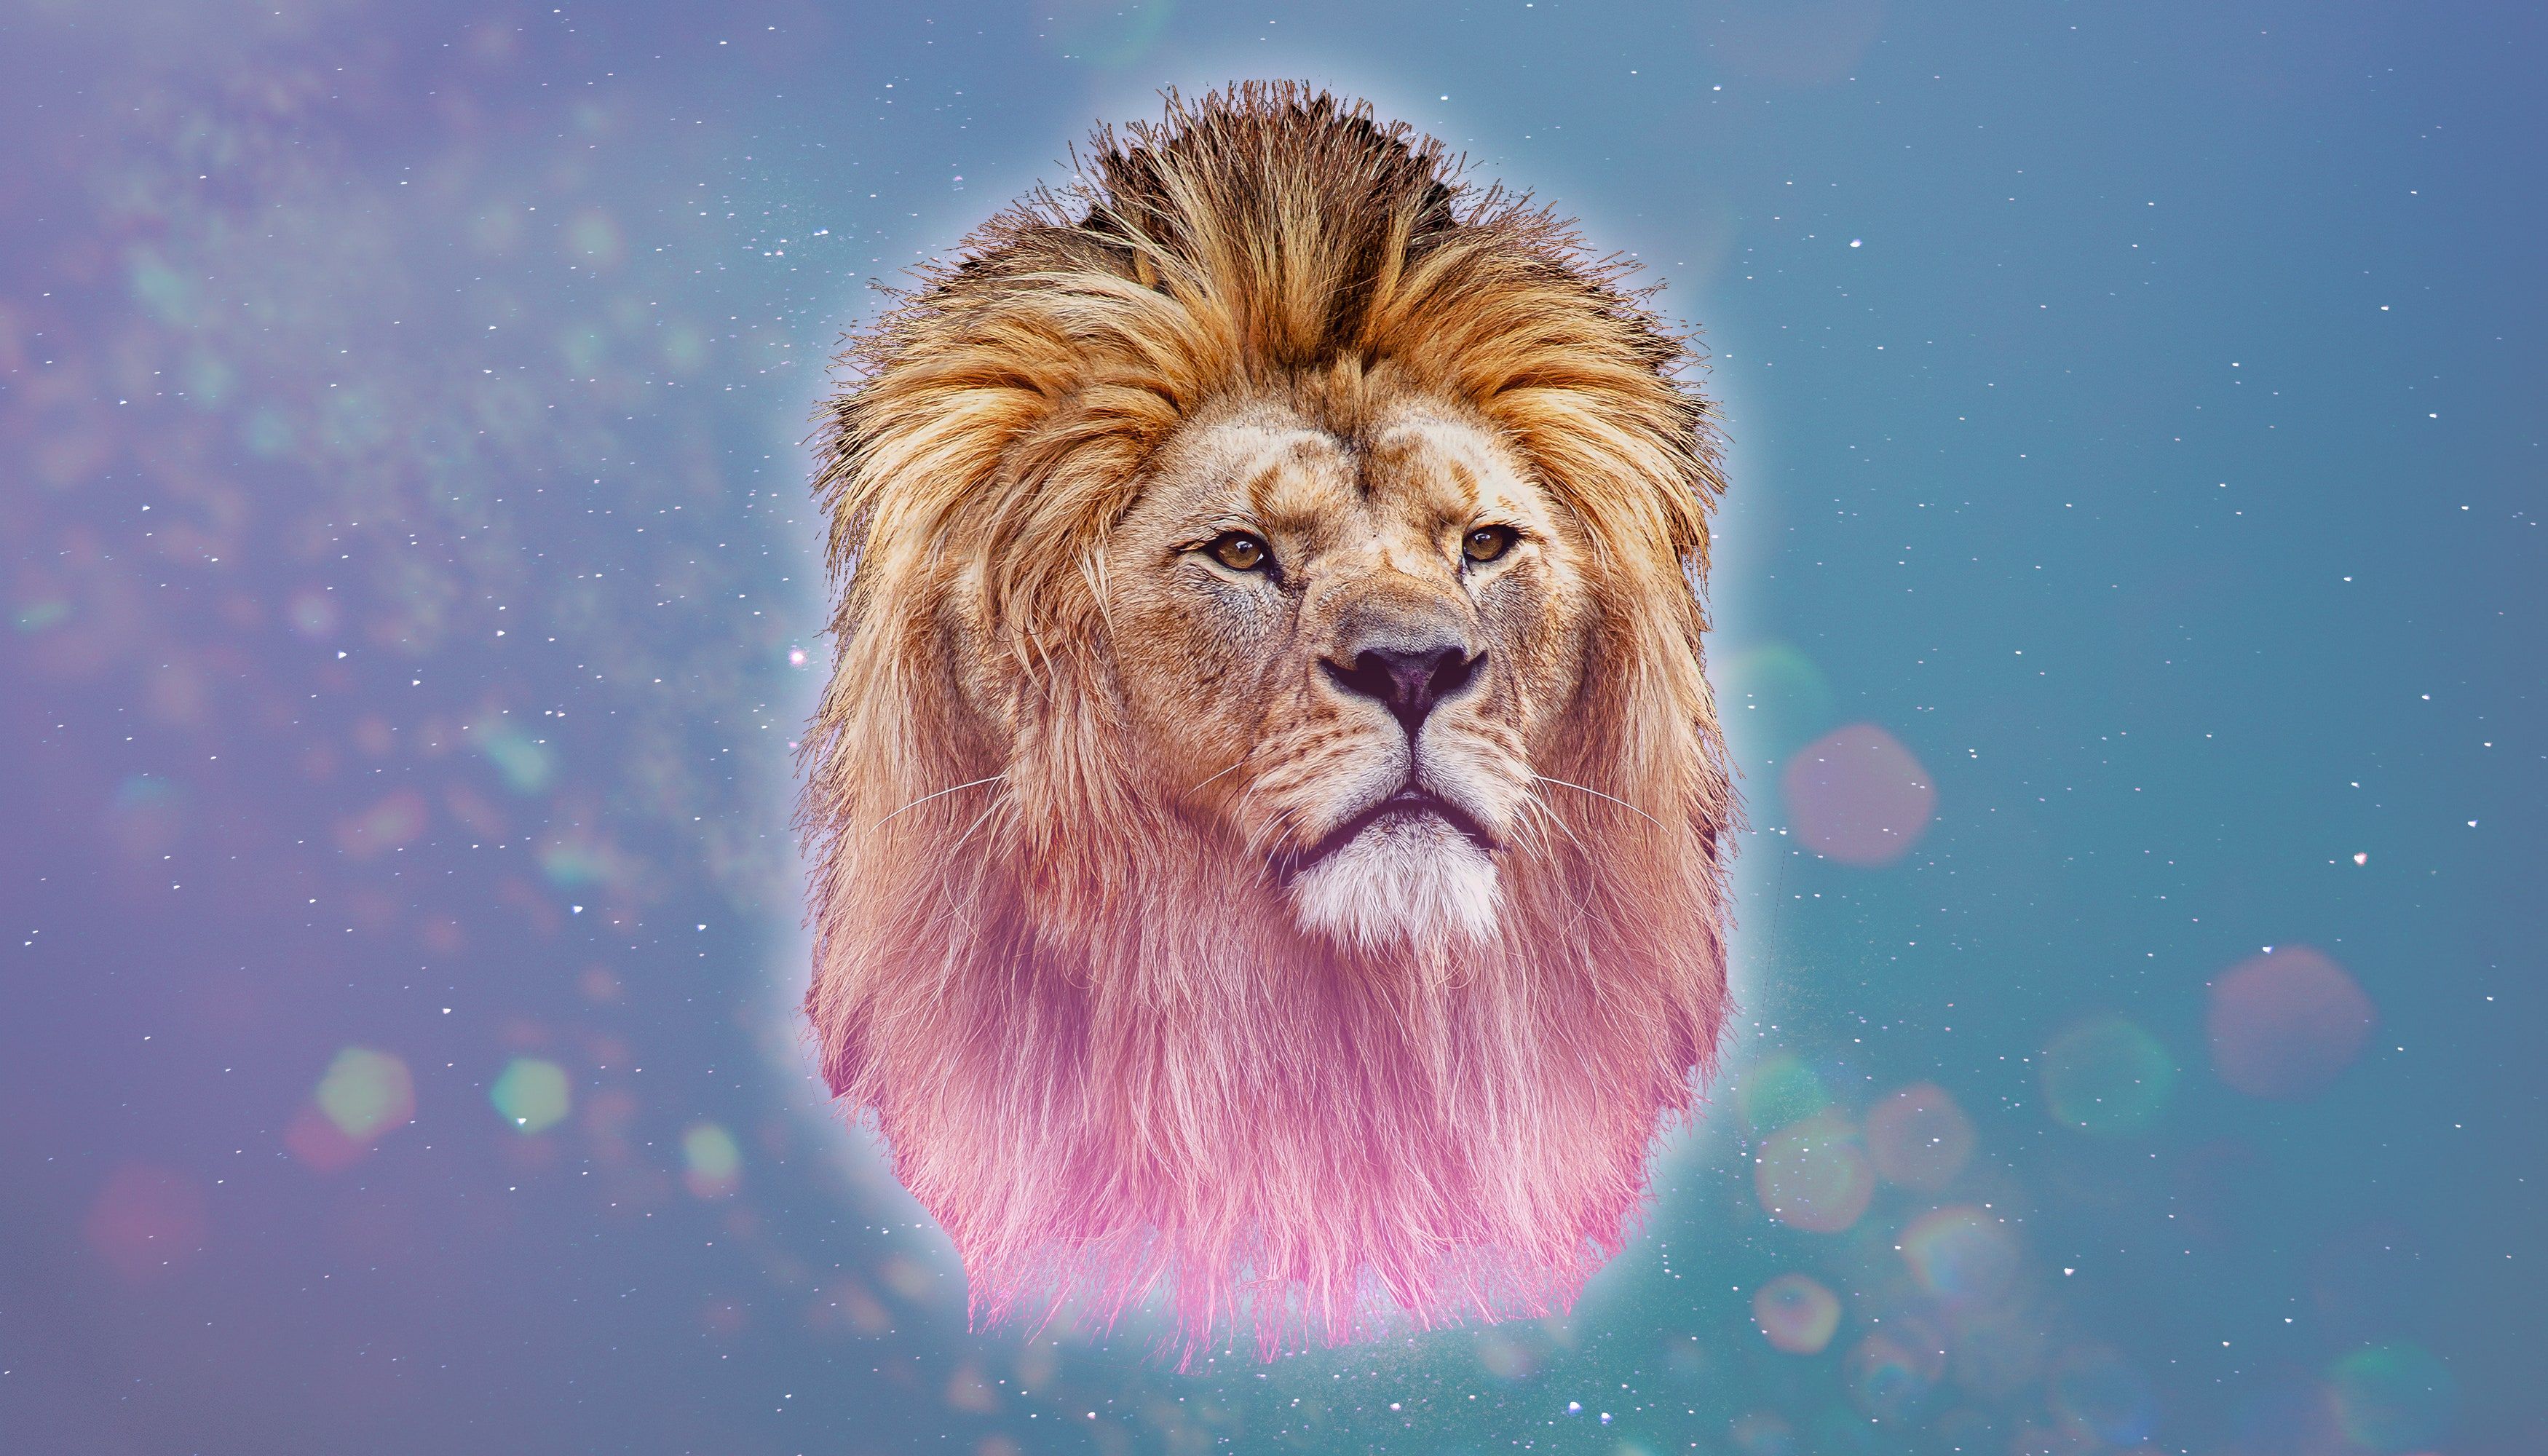 A lion with a pink mane and a blue background - Leo